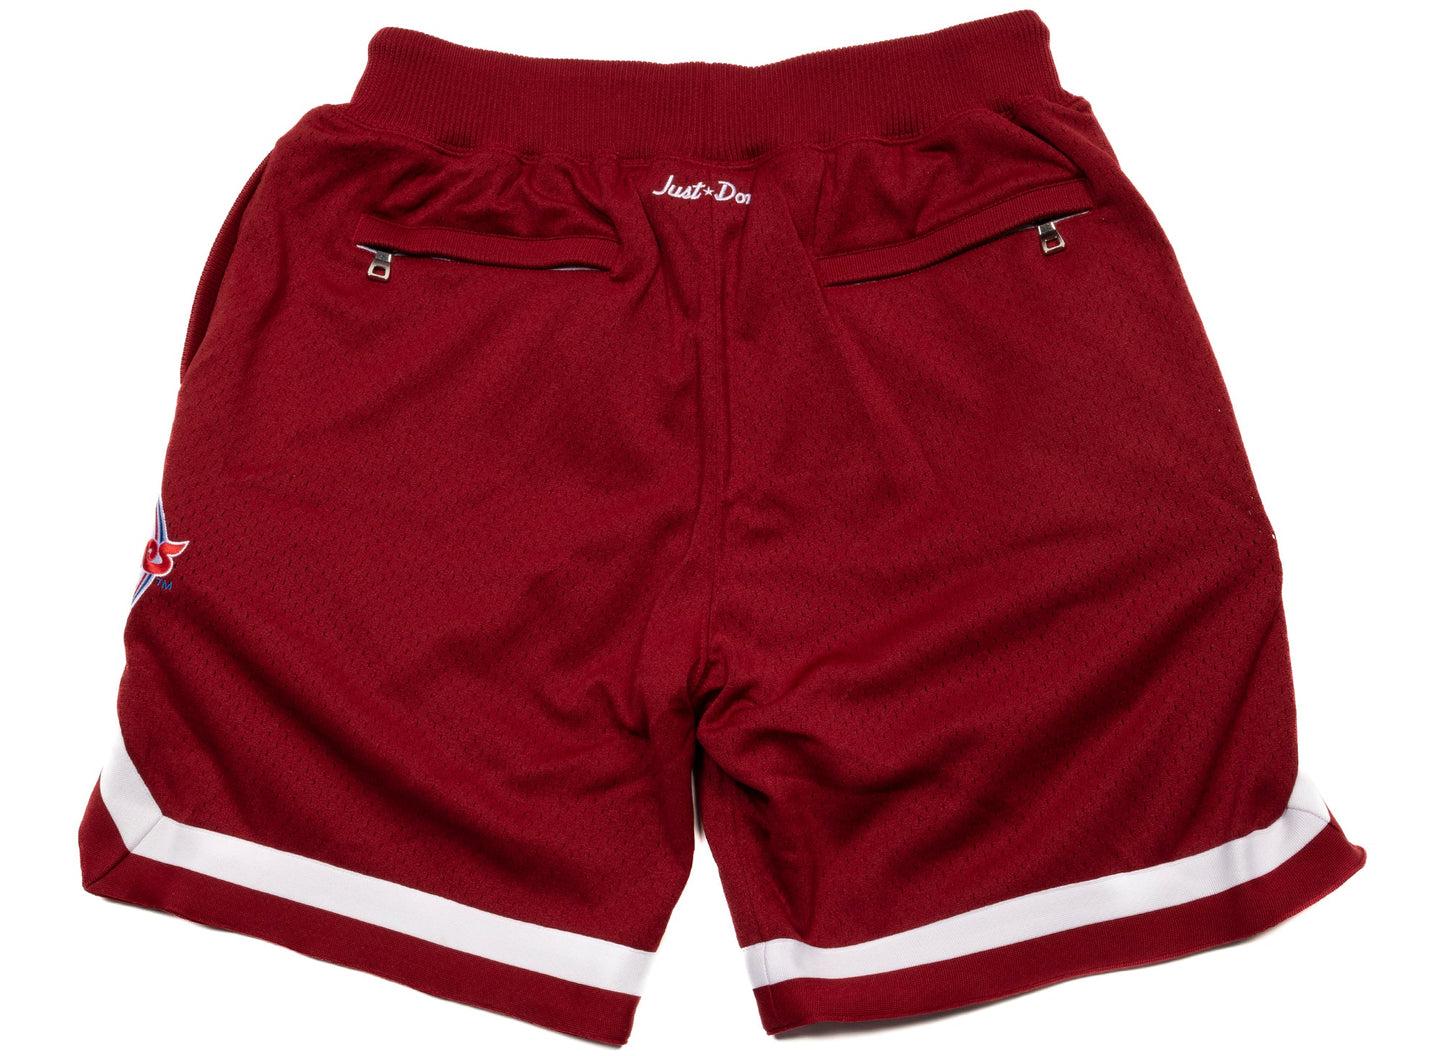 Mitchell & Ness x Just Don Cooperstown Phillies Shorts